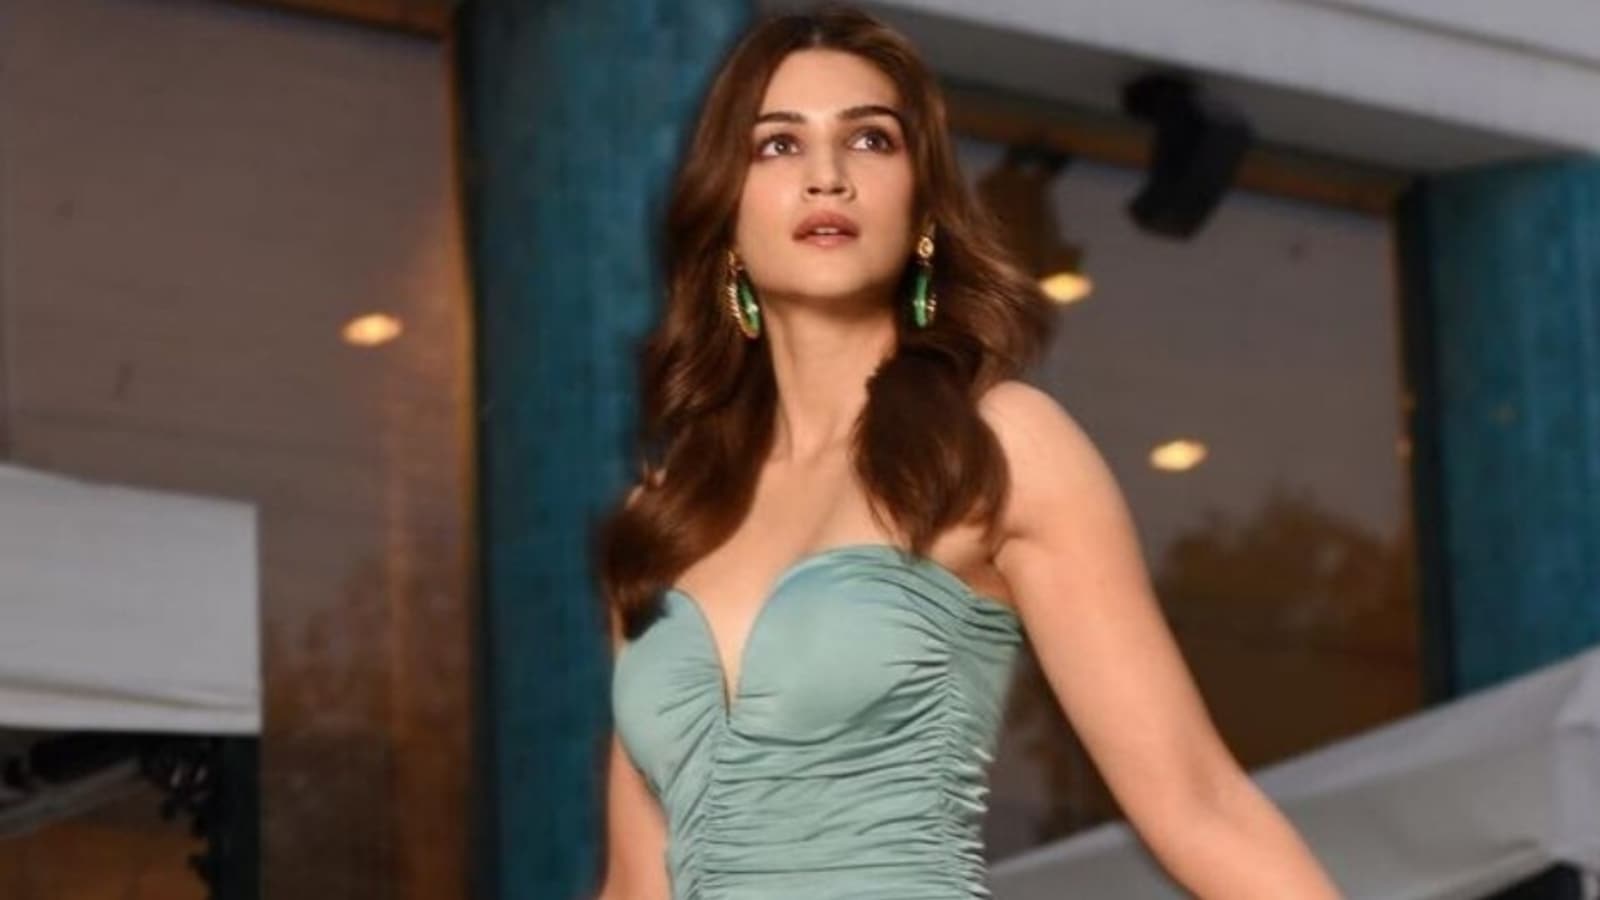 Kriti Sanon serves sultry elegance in ₹4k strapless bodycon dress for Bachchhan Paandey Delhi promotions